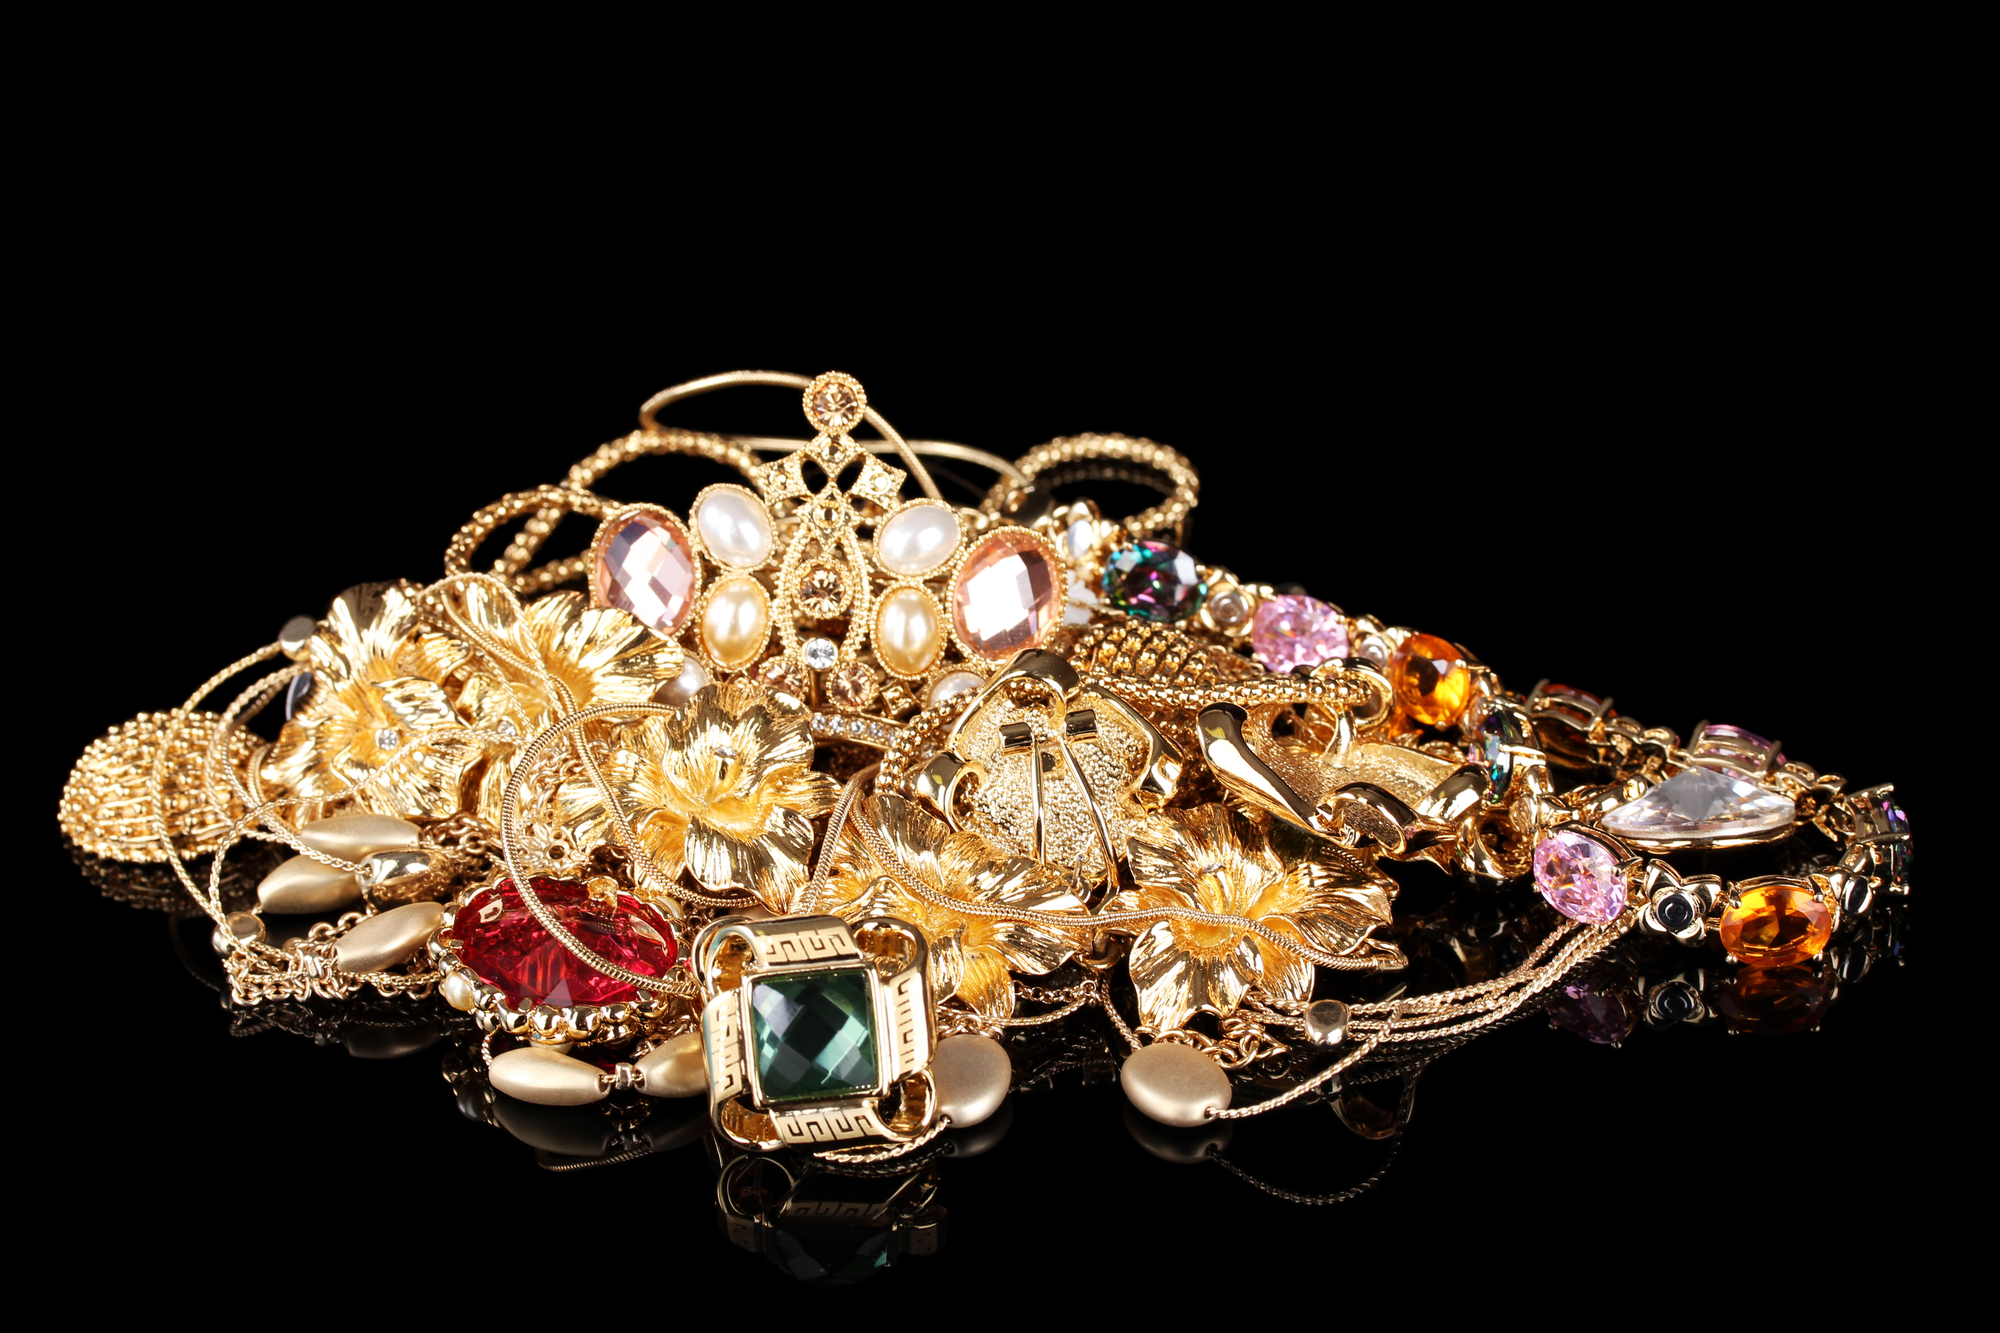 How to Care for Jewelry: Easy Guidelines and Tips